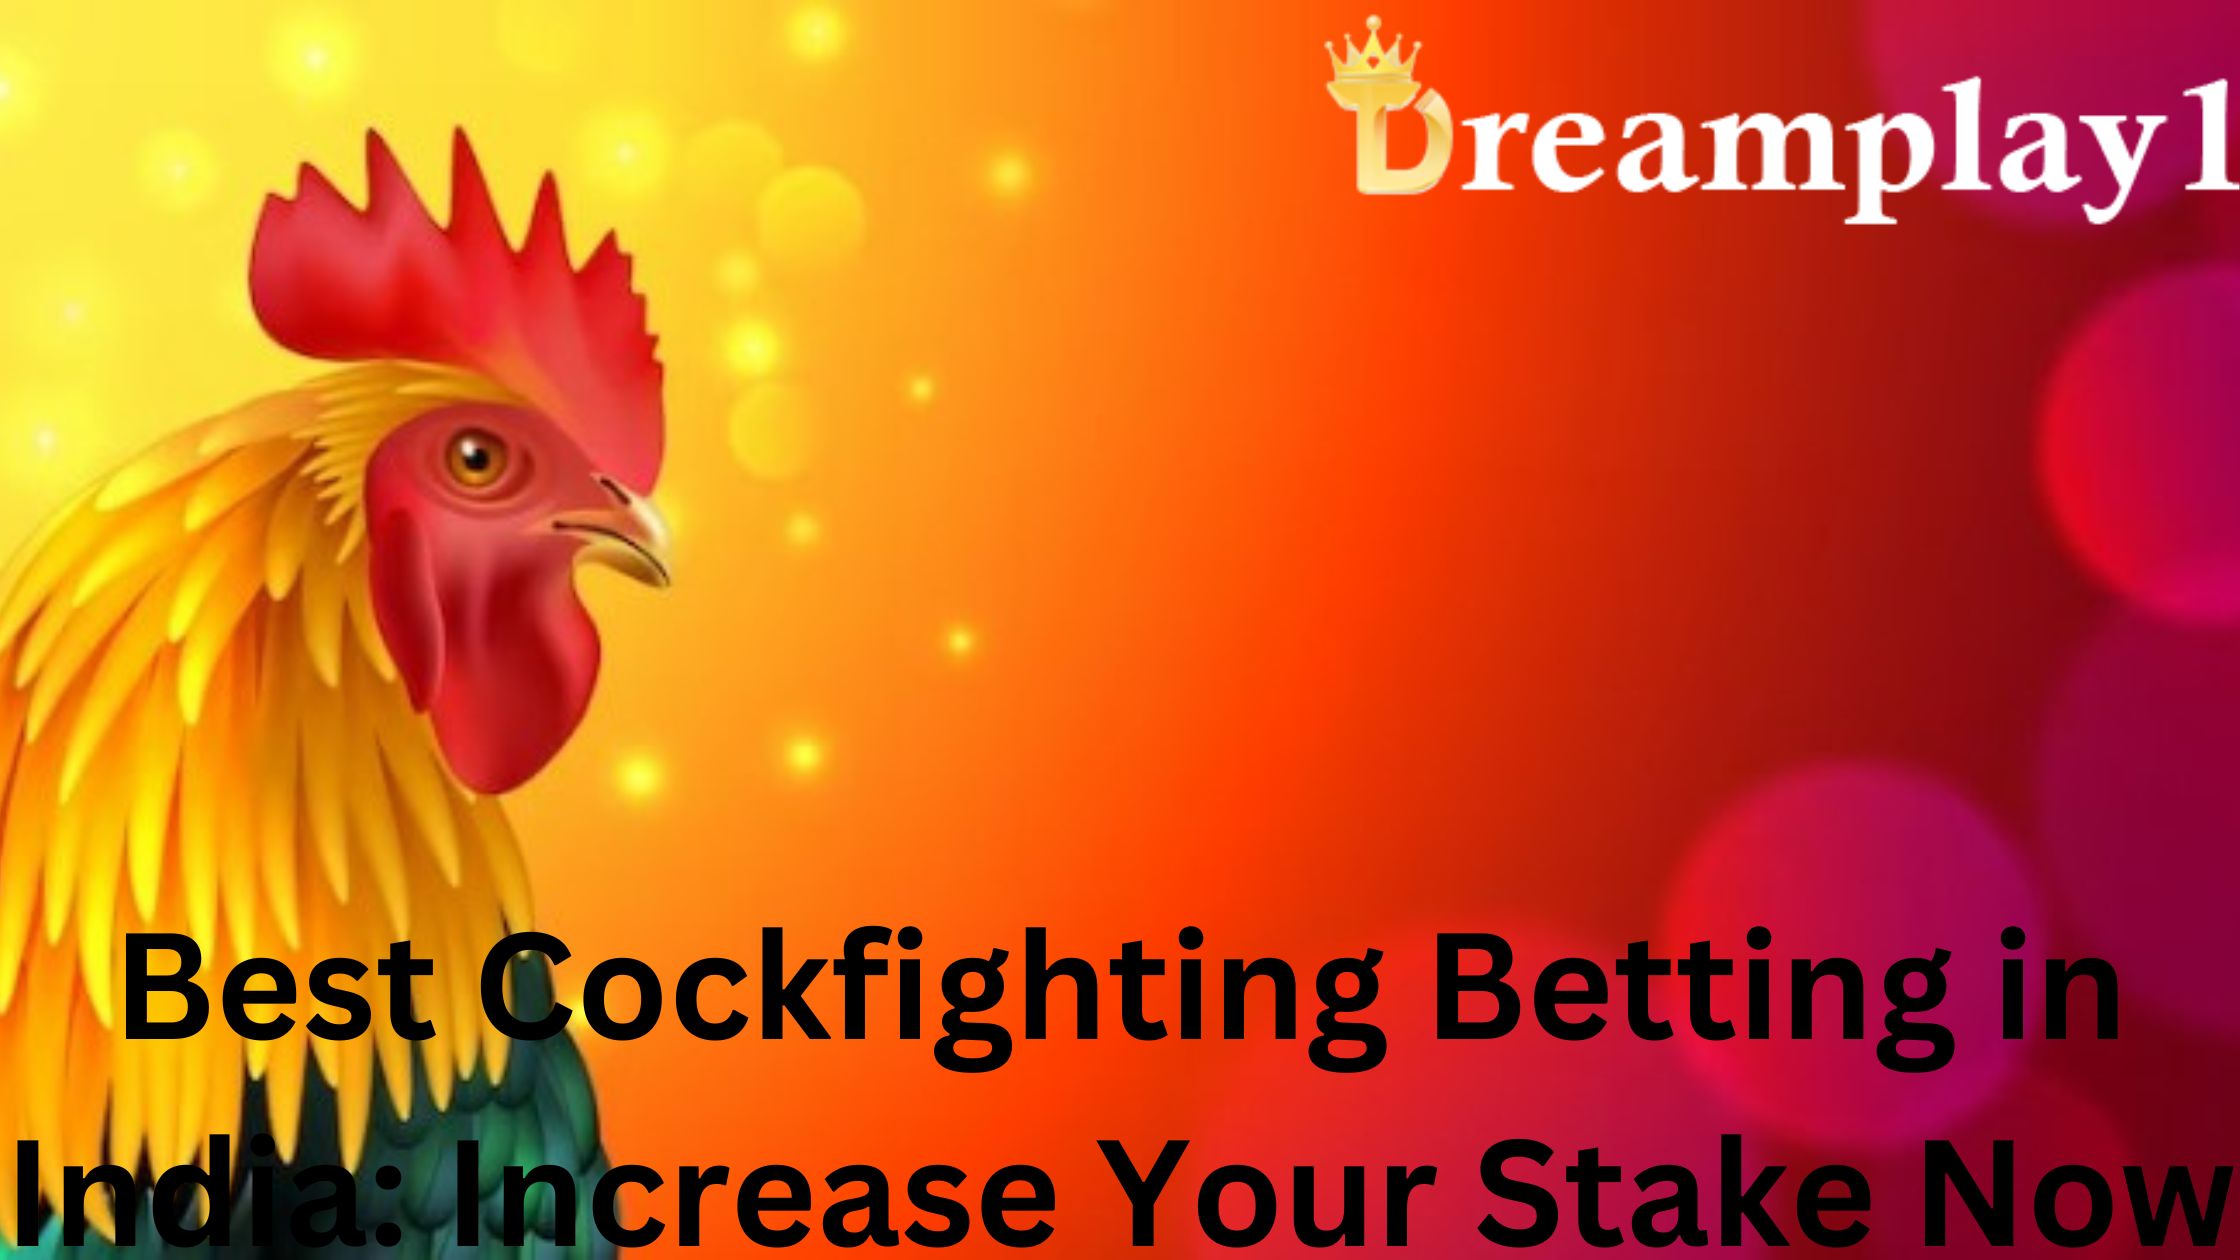 Best Cockfighting Betting in India